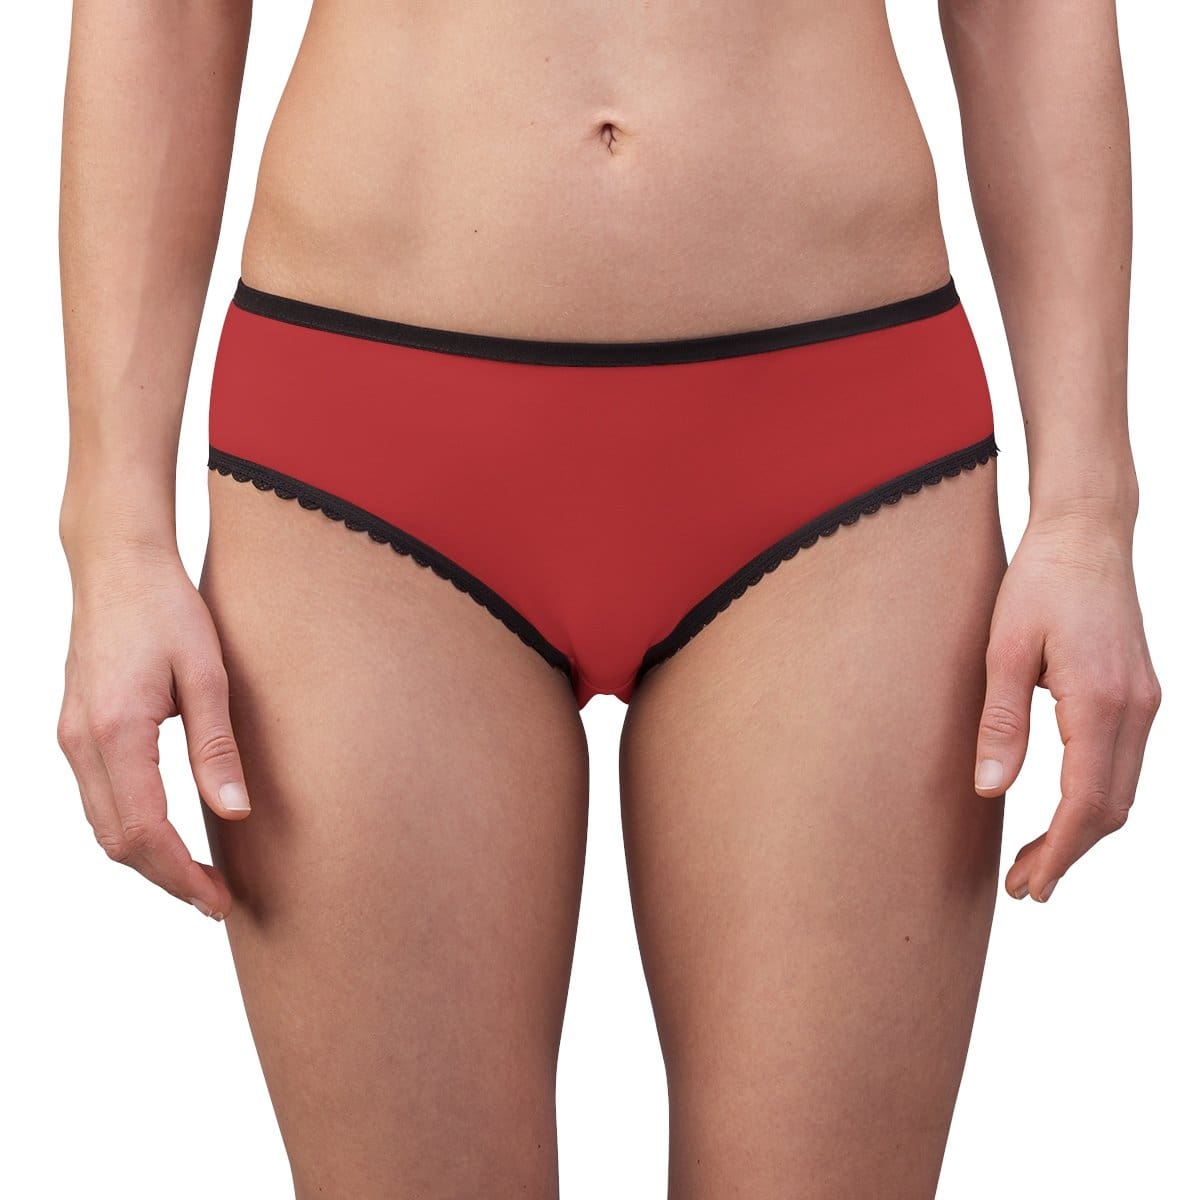  Red D20 Dice Women's Underwear Low Rise Stretch